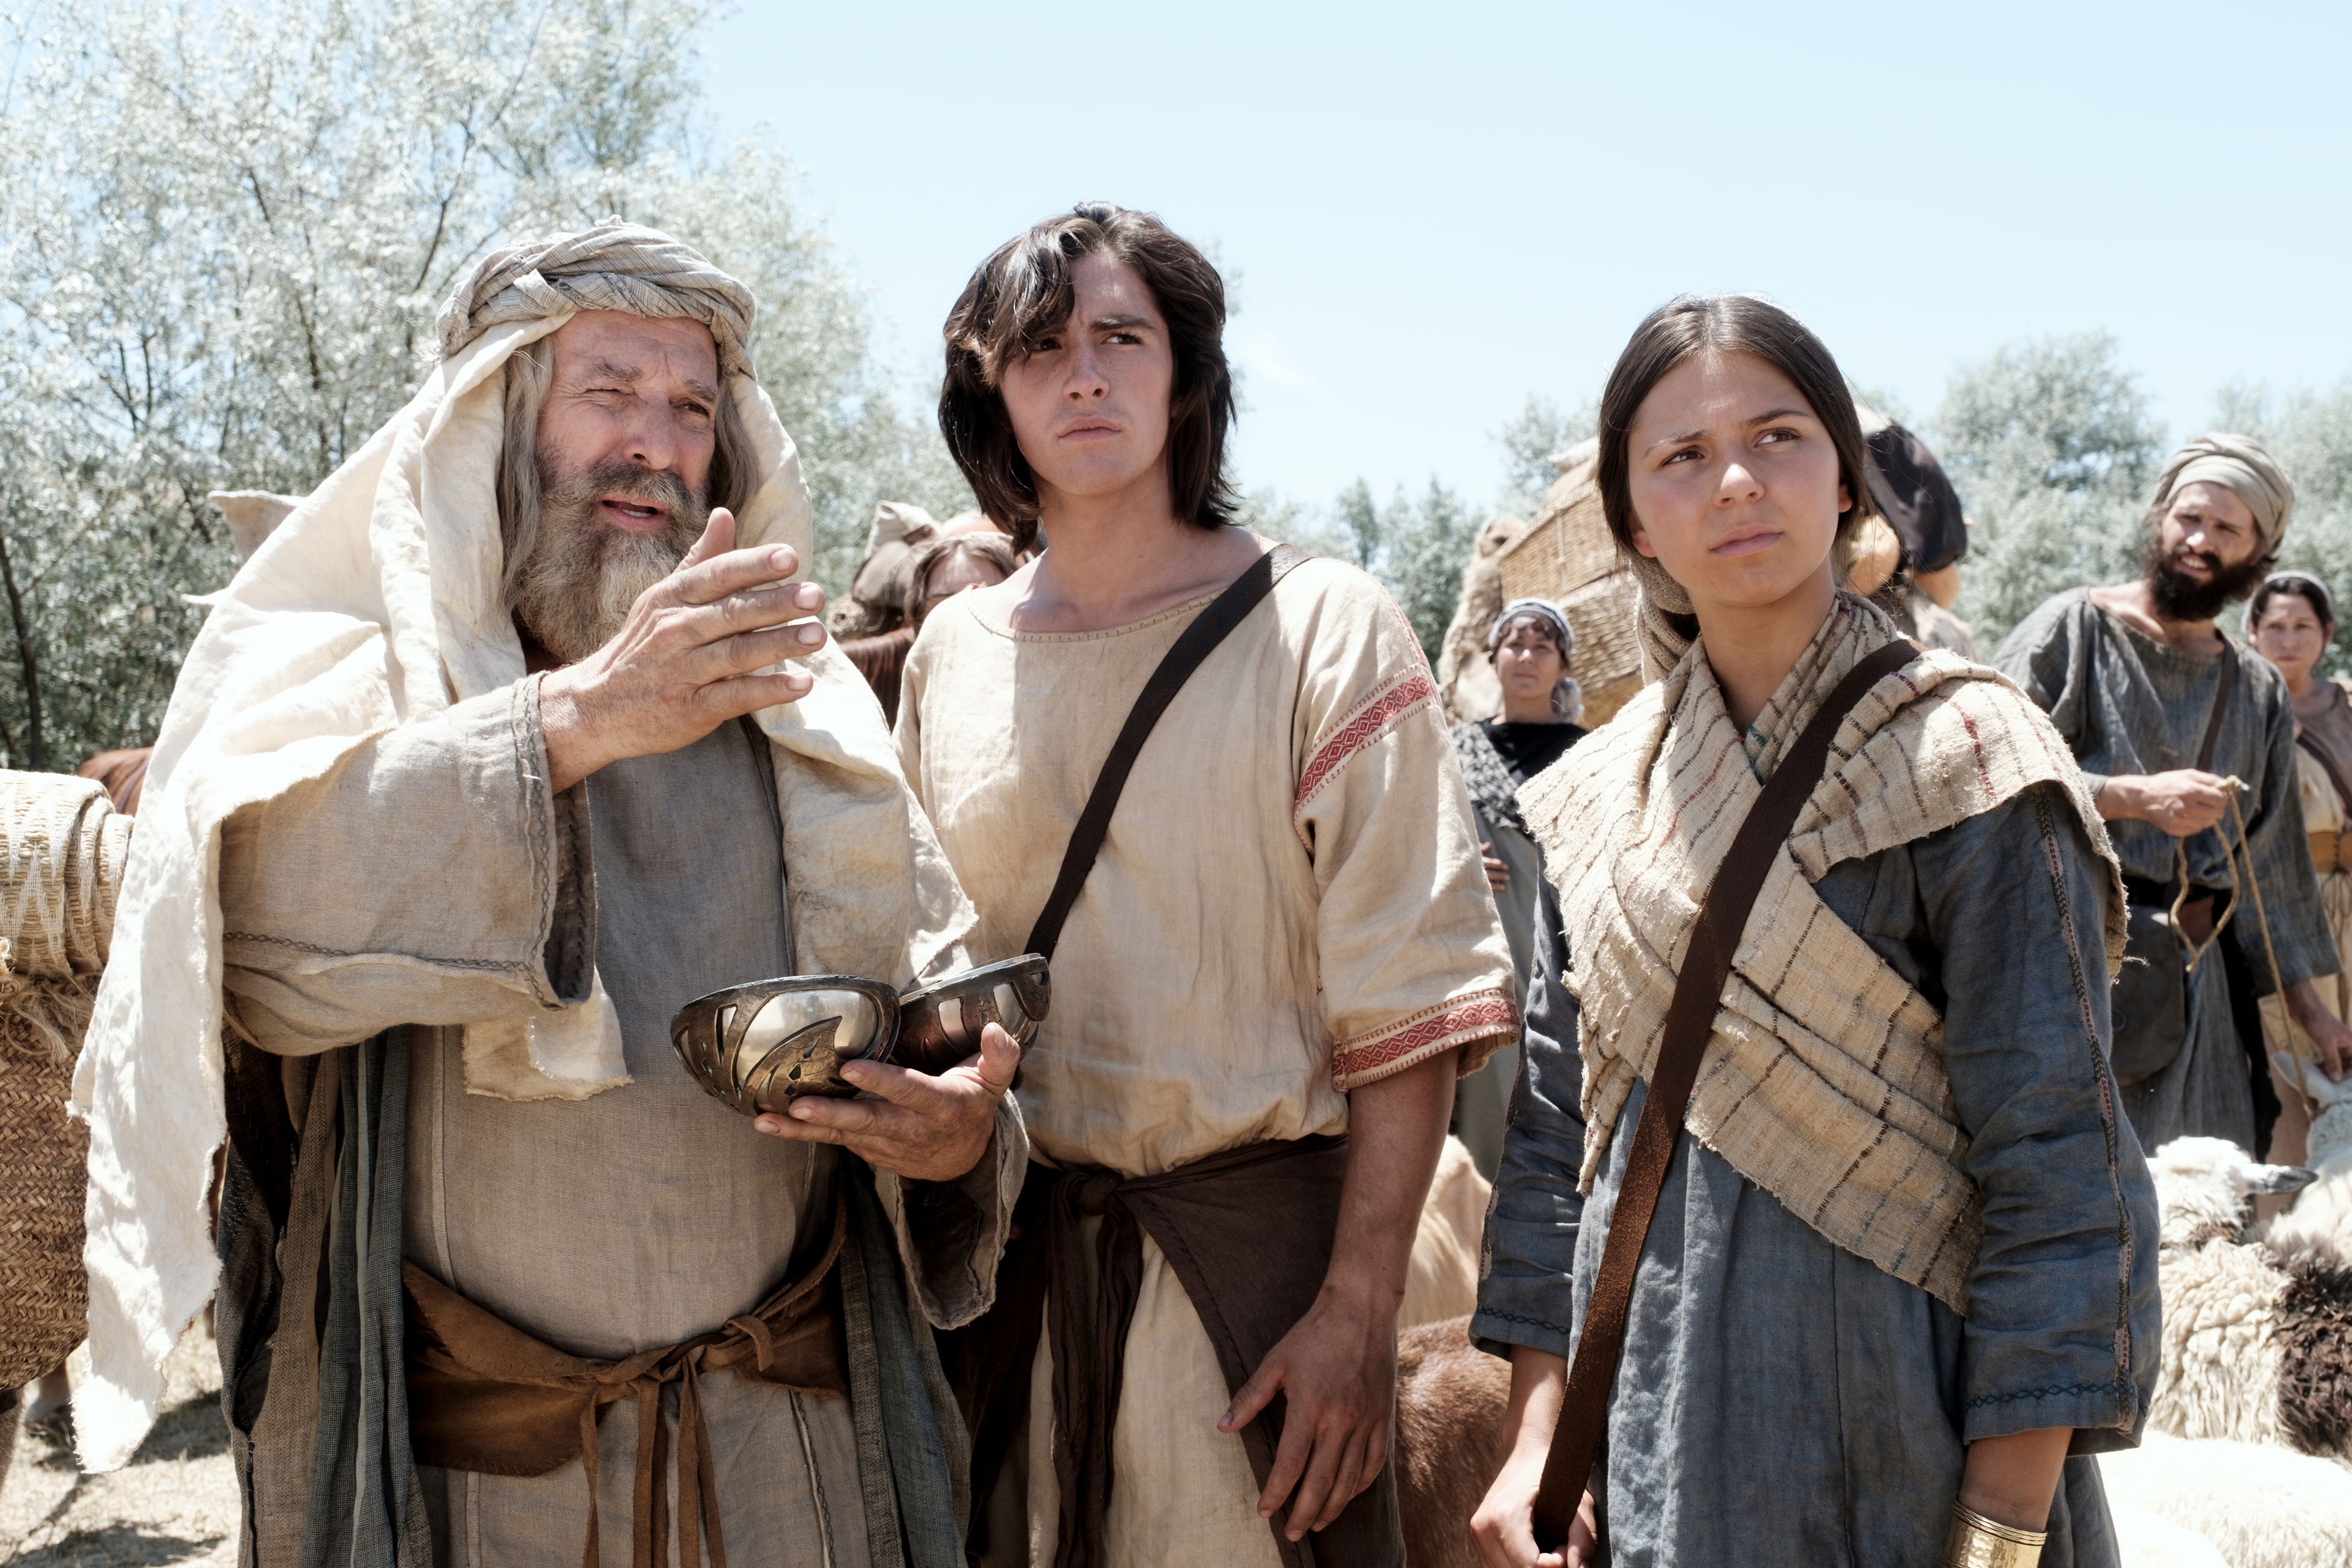 Lehi, Nephi, and Nephi's wife use the Liahona as the families break camp.